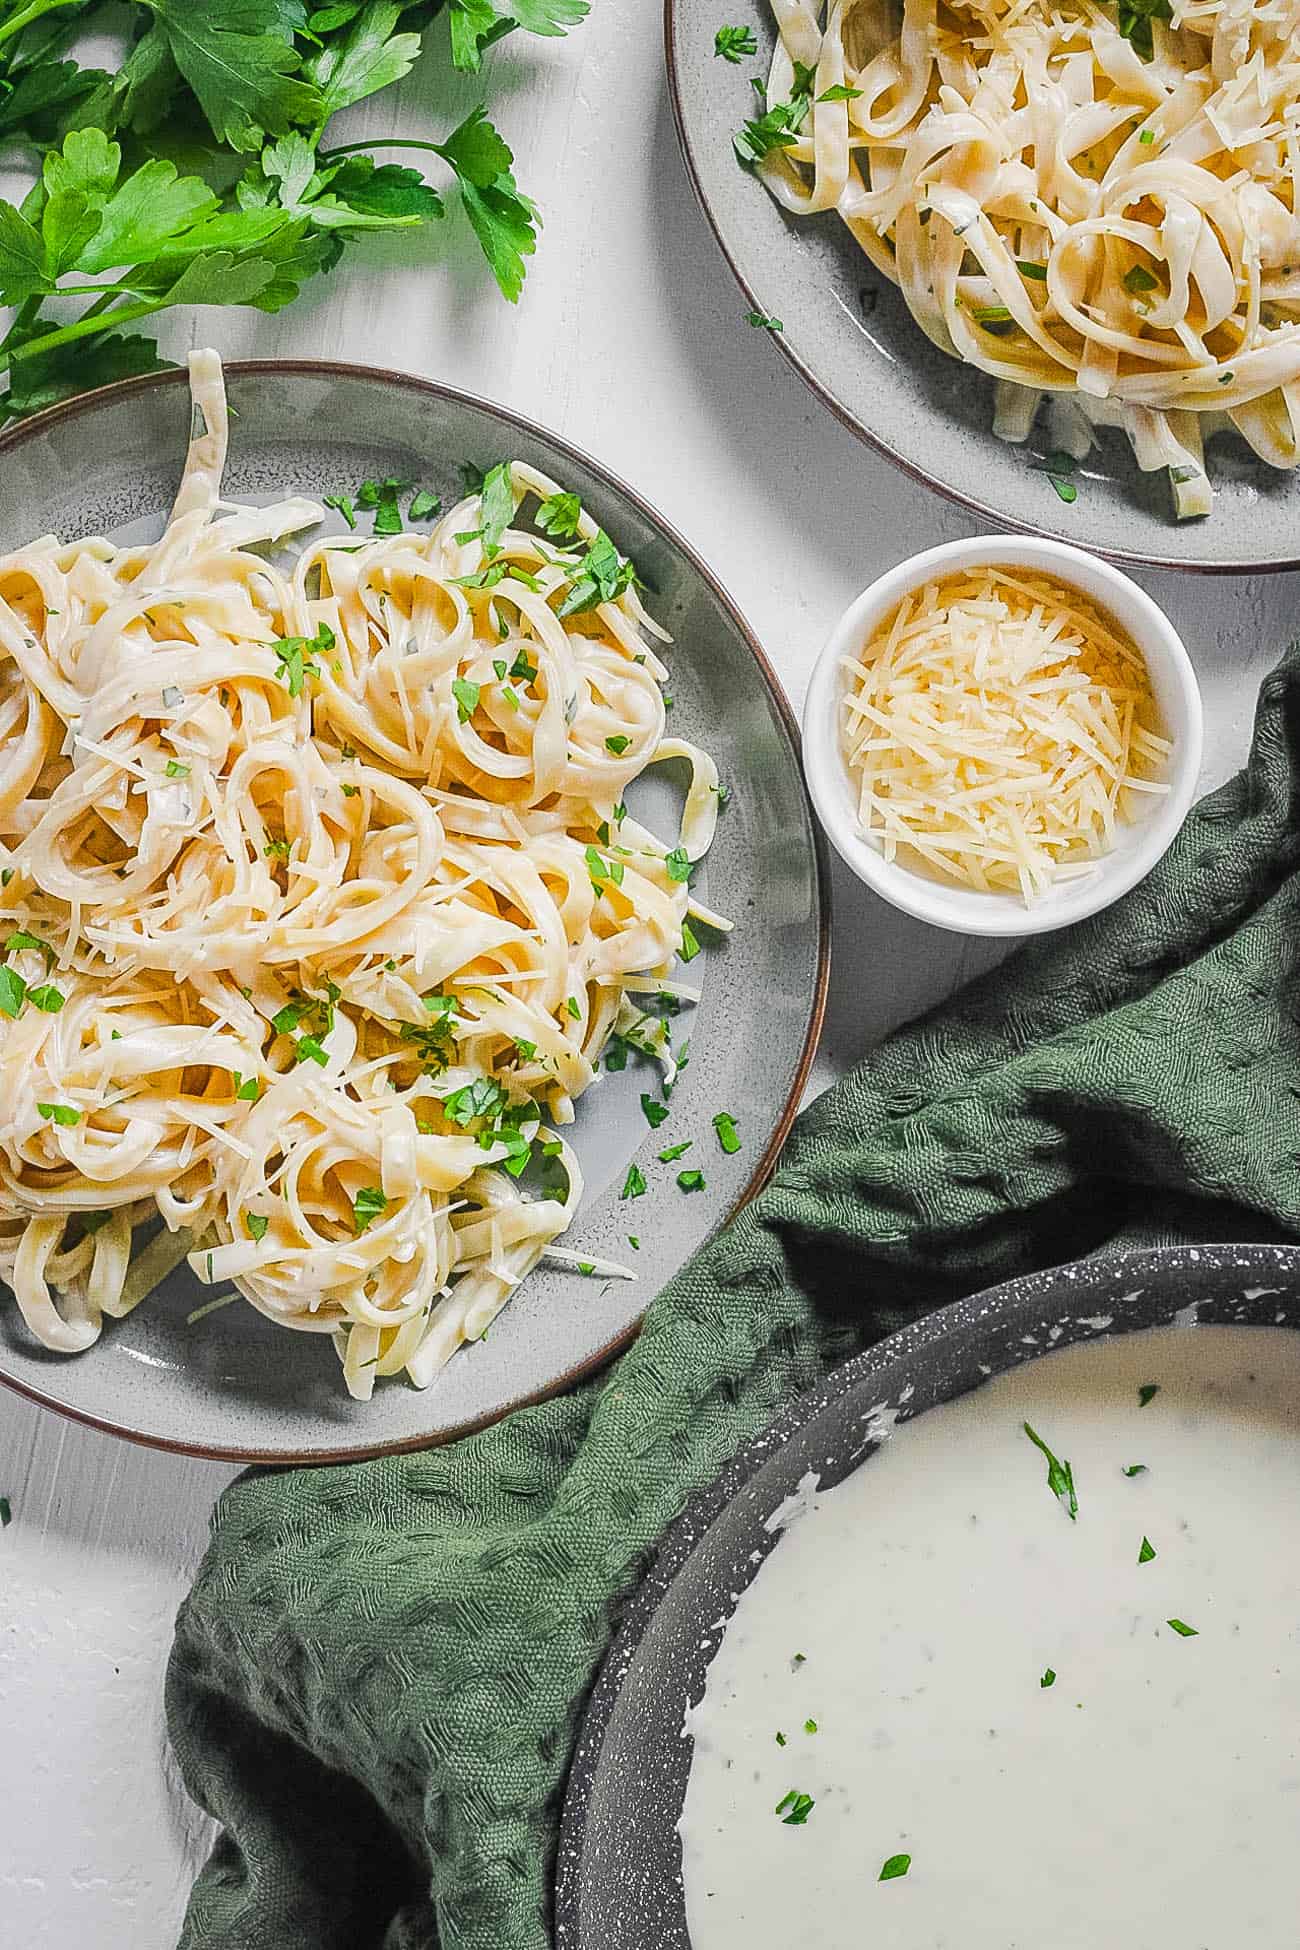 alfredo sauce without heavy cream tossed with fettuccine in a bowl